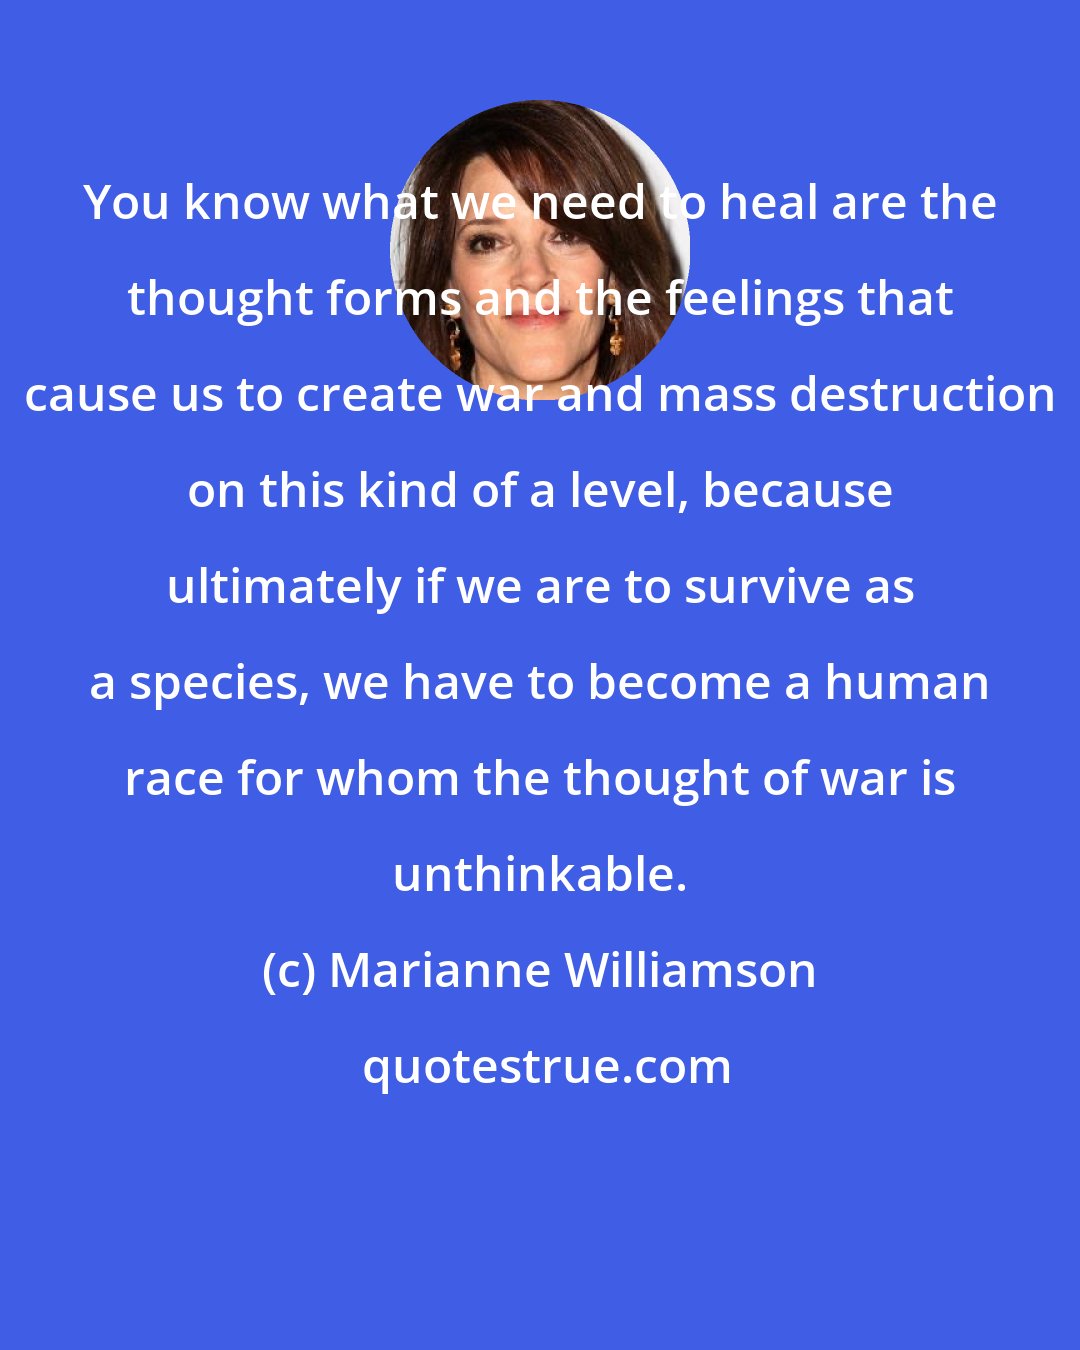 Marianne Williamson: You know what we need to heal are the thought forms and the feelings that cause us to create war and mass destruction on this kind of a level, because ultimately if we are to survive as a species, we have to become a human race for whom the thought of war is unthinkable.